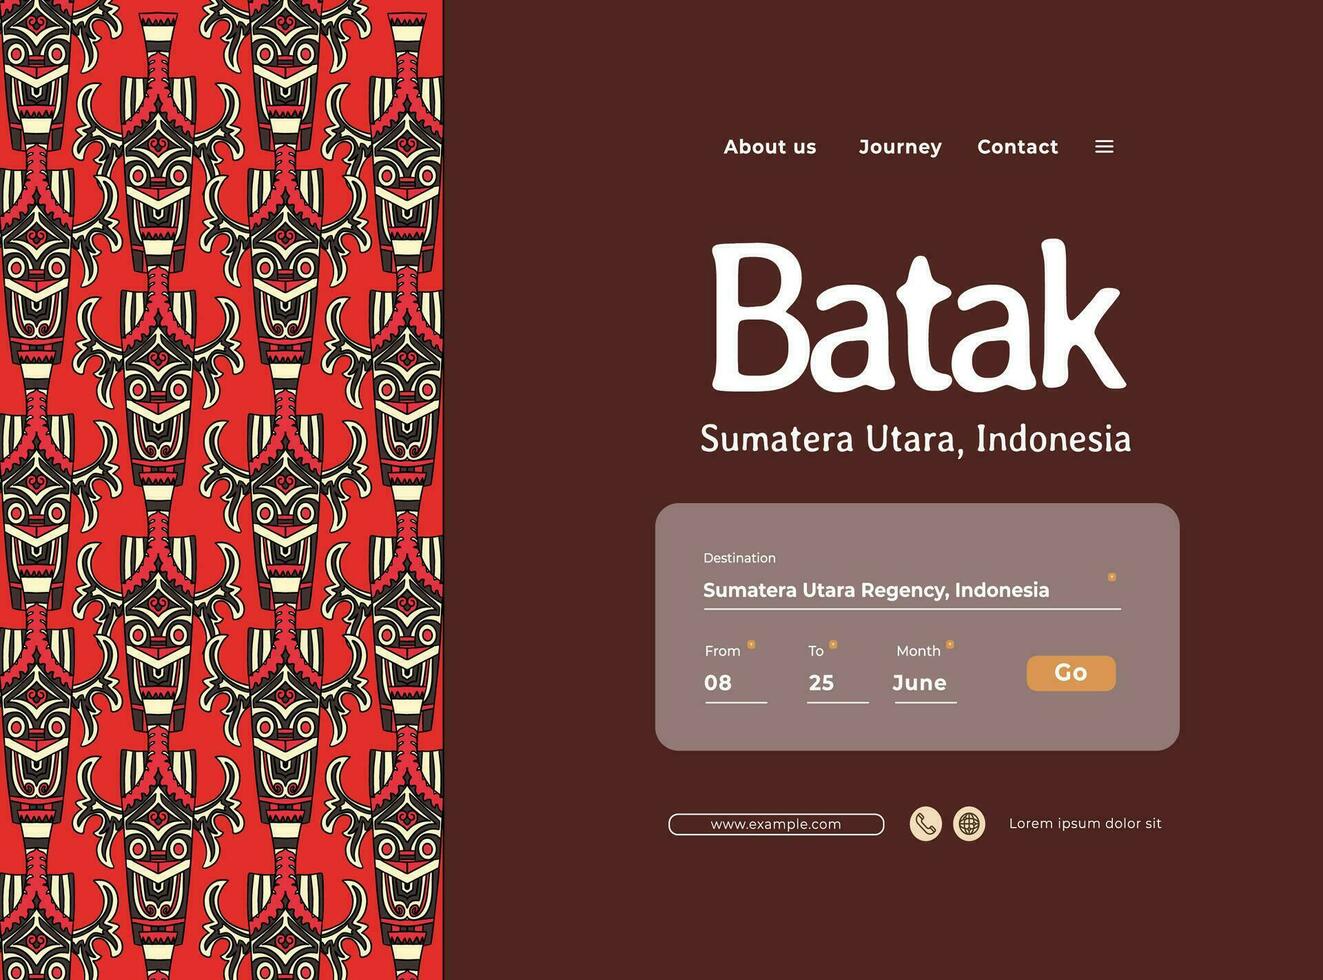 Indonesia Bataknese design layout idea for social media or event background vector